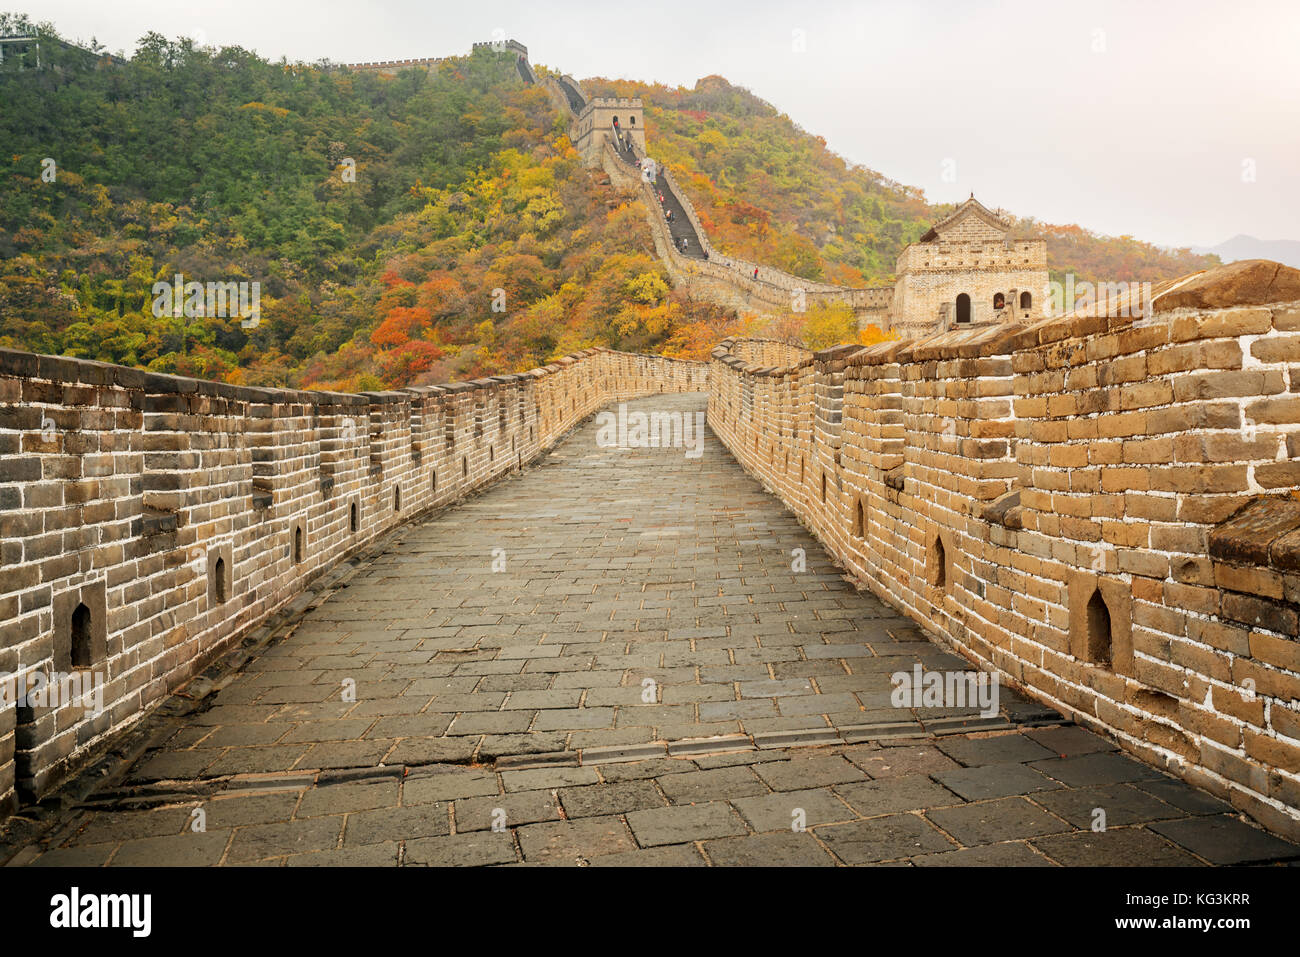 China The great wall distant view compressed towers and wall segments autumn season in mountains near Beijing ancient chinese fortification military l Stock Photo